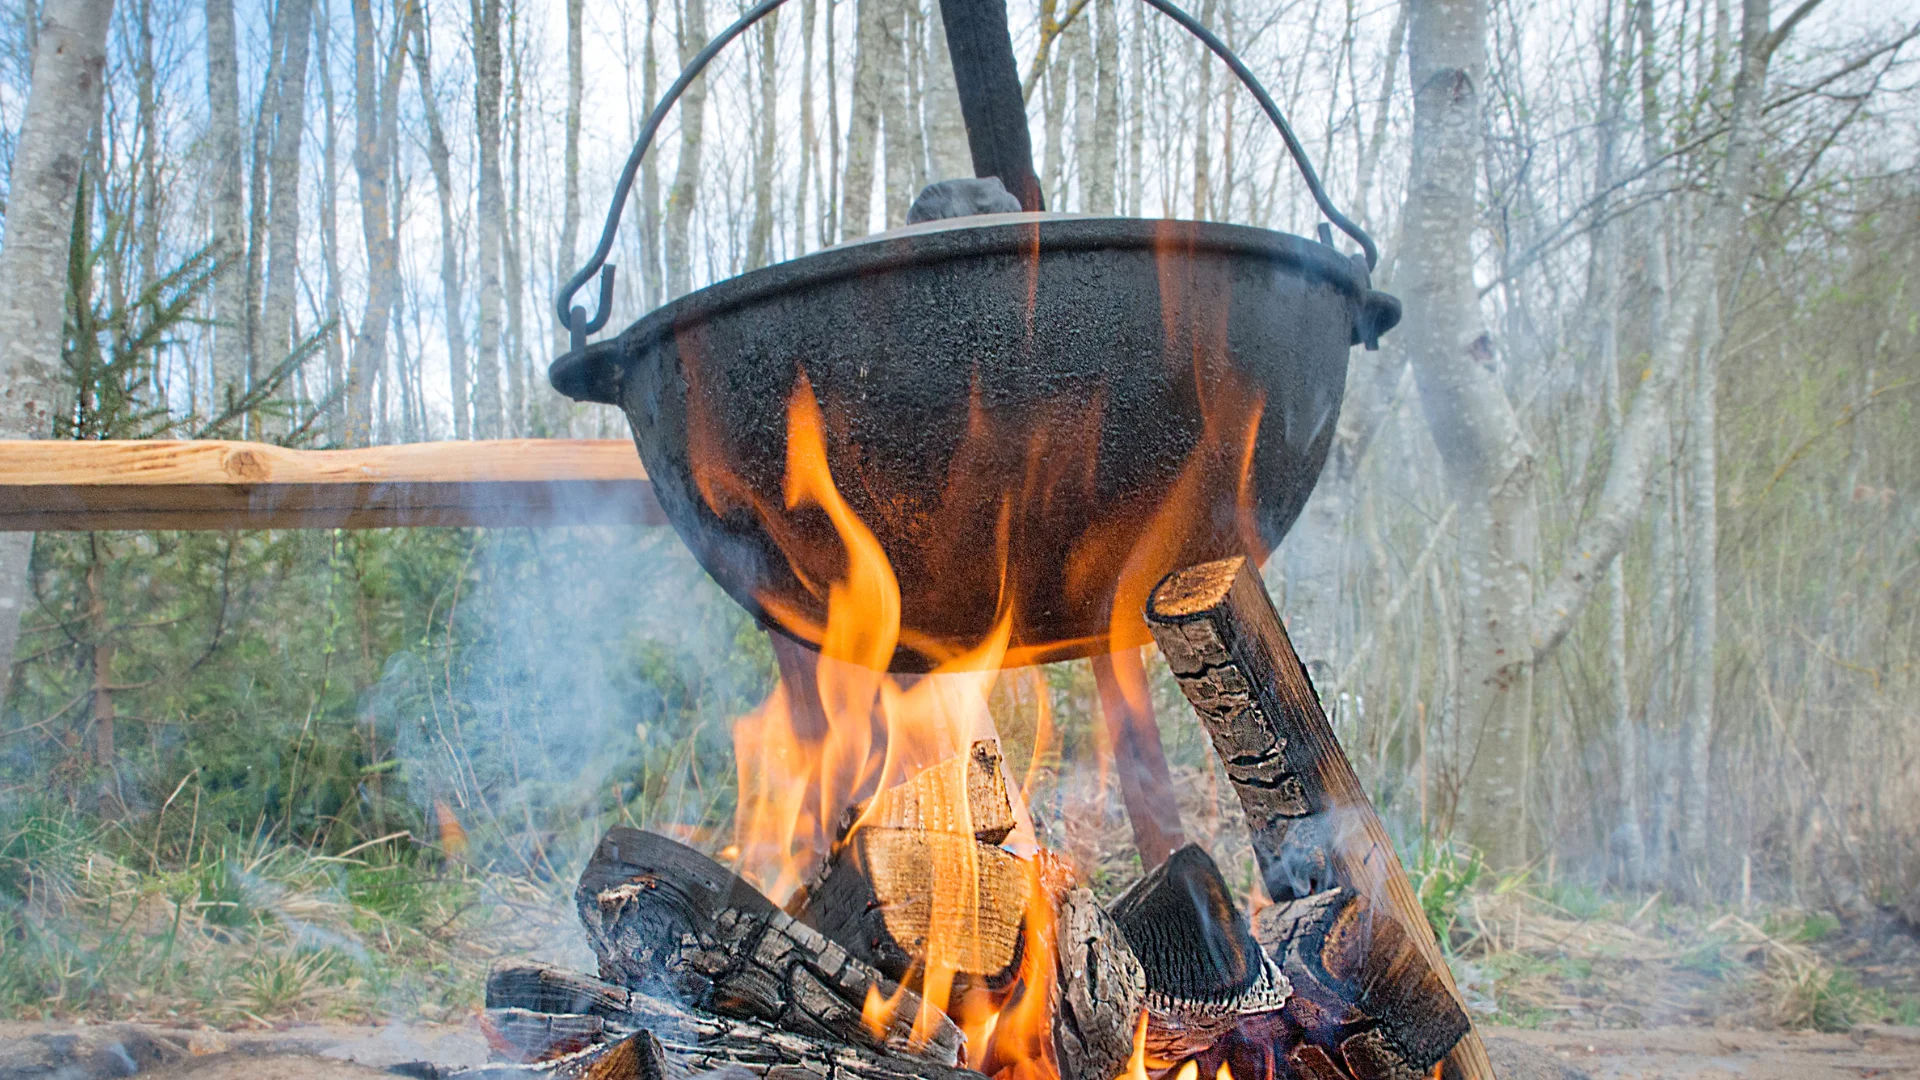 cooking over campfire